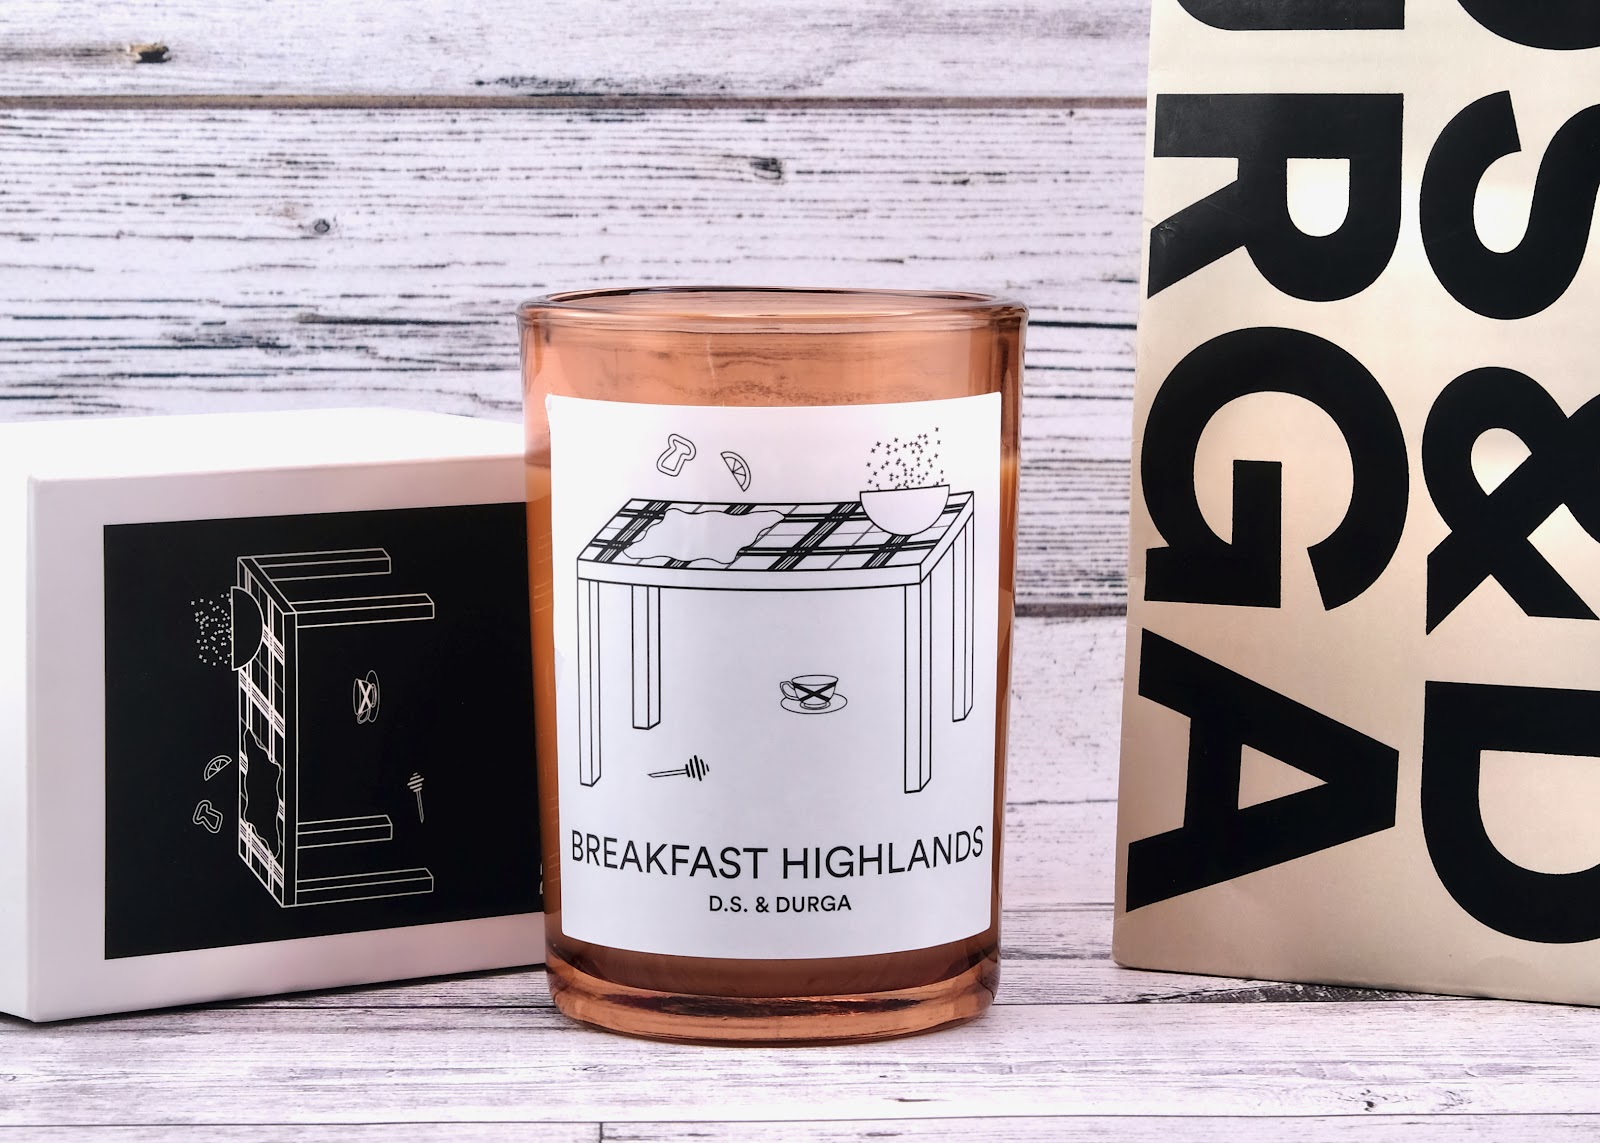 DS & DURGA | Breakfast Highlands Scented Candle: Review